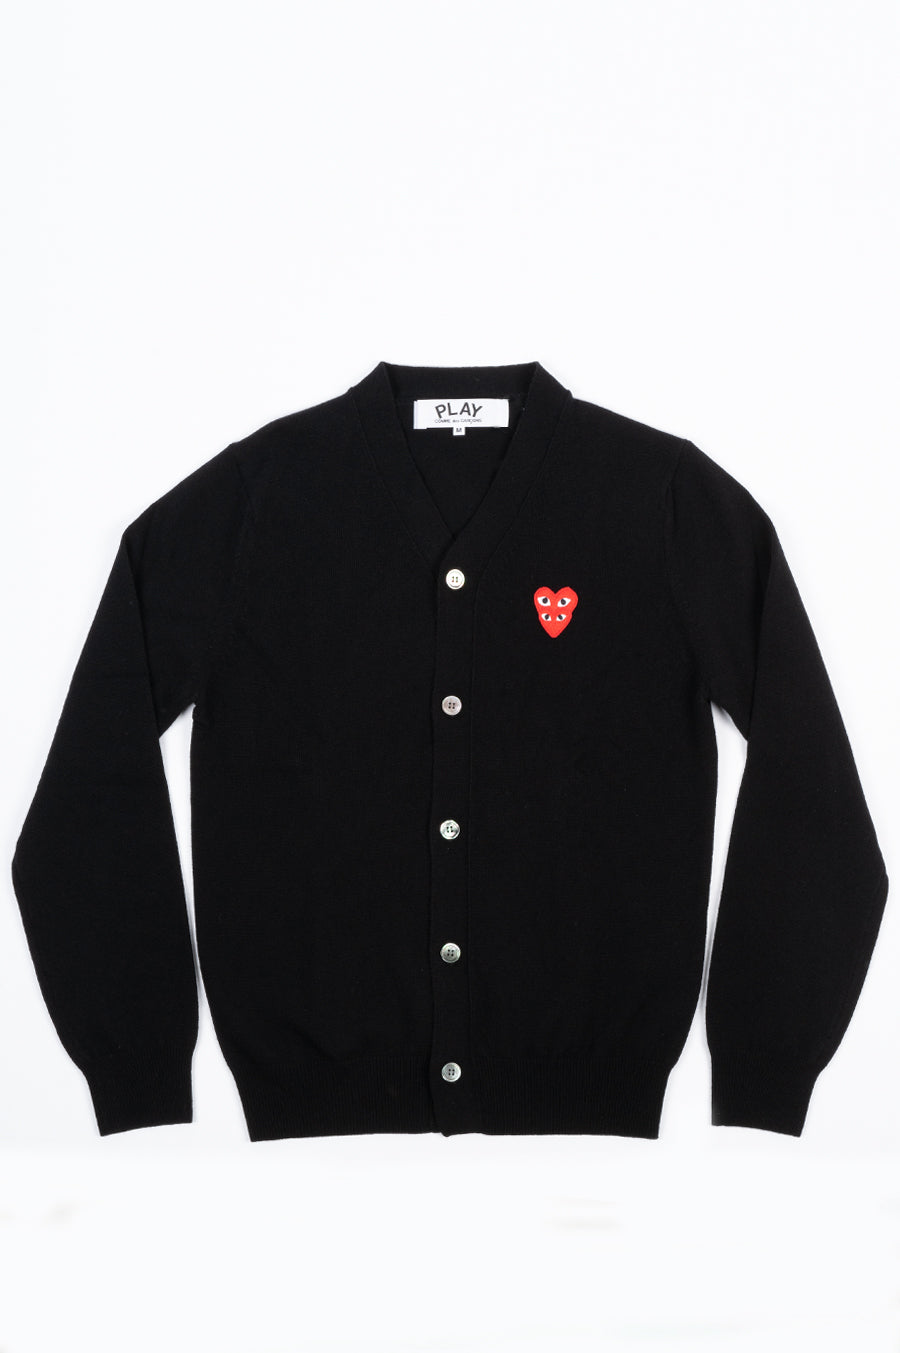 COMME DES GARCONS PLAY DOUBLE HEART CARDIGAN